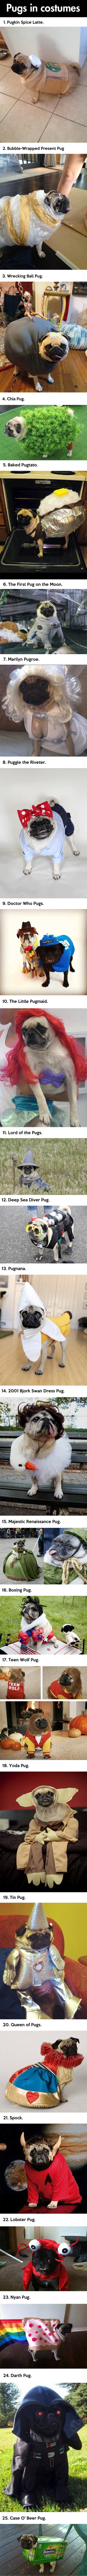 Pugs in Costumes funny picture